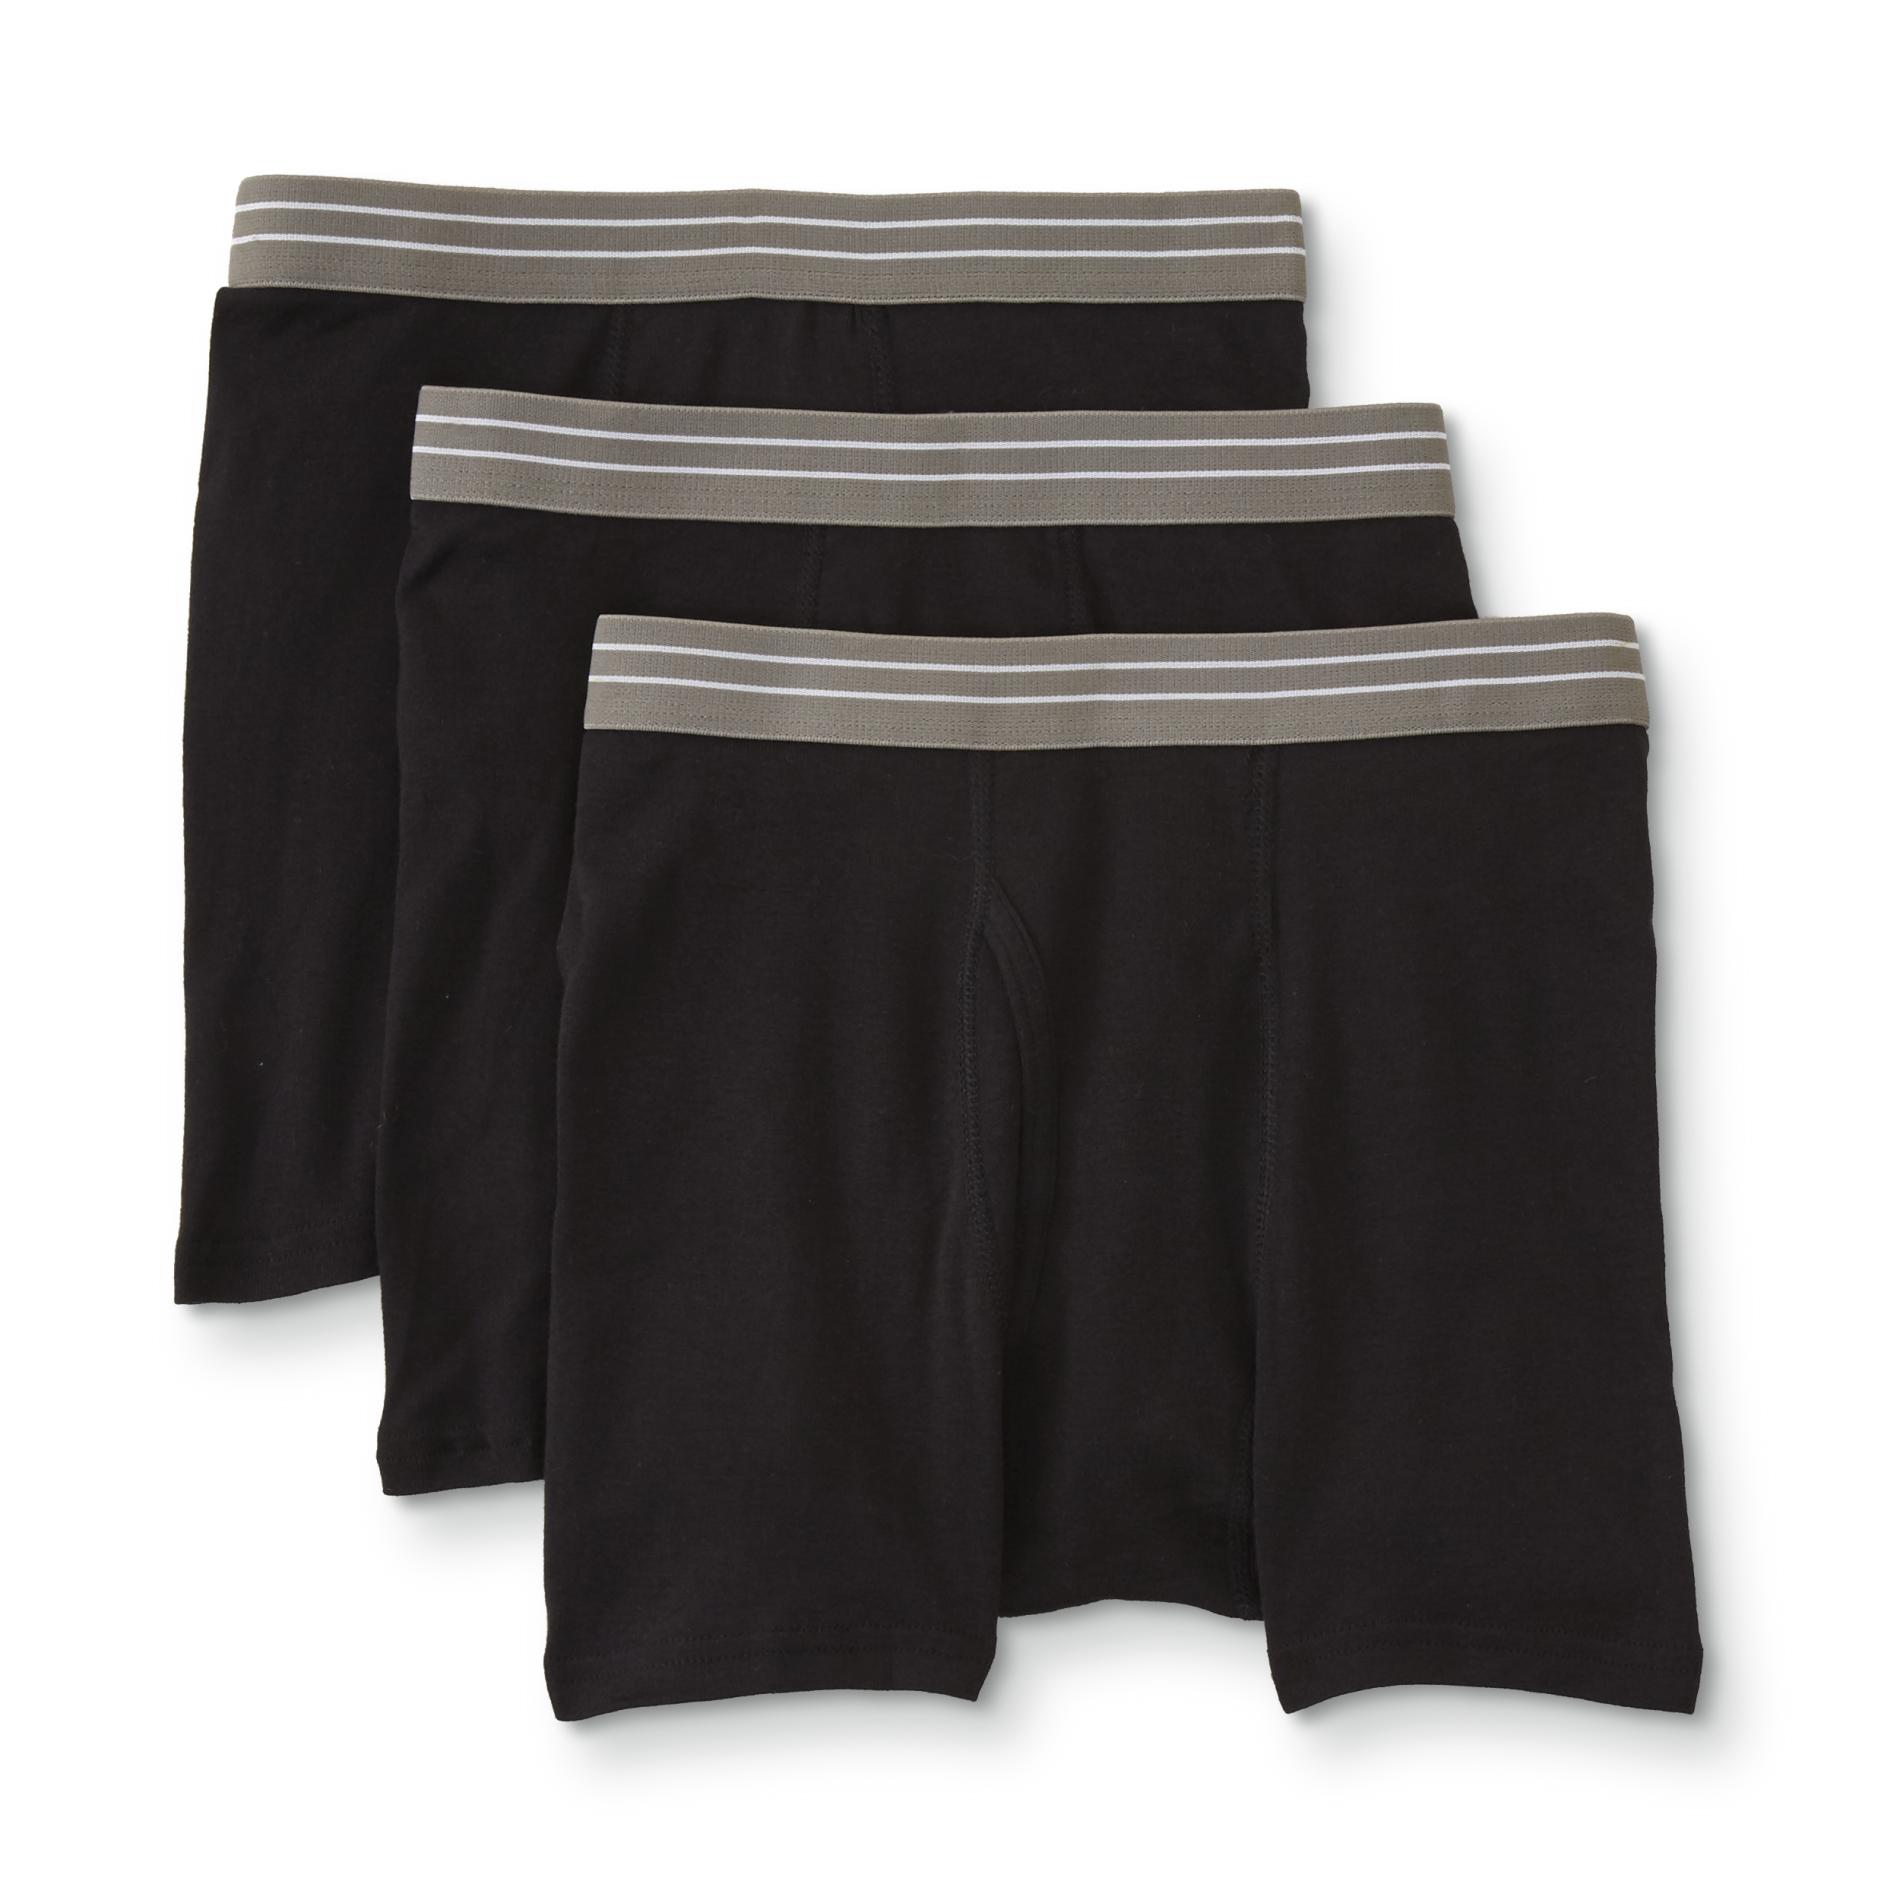 Simply Styled Men's 3-Pack Boxer Briefs